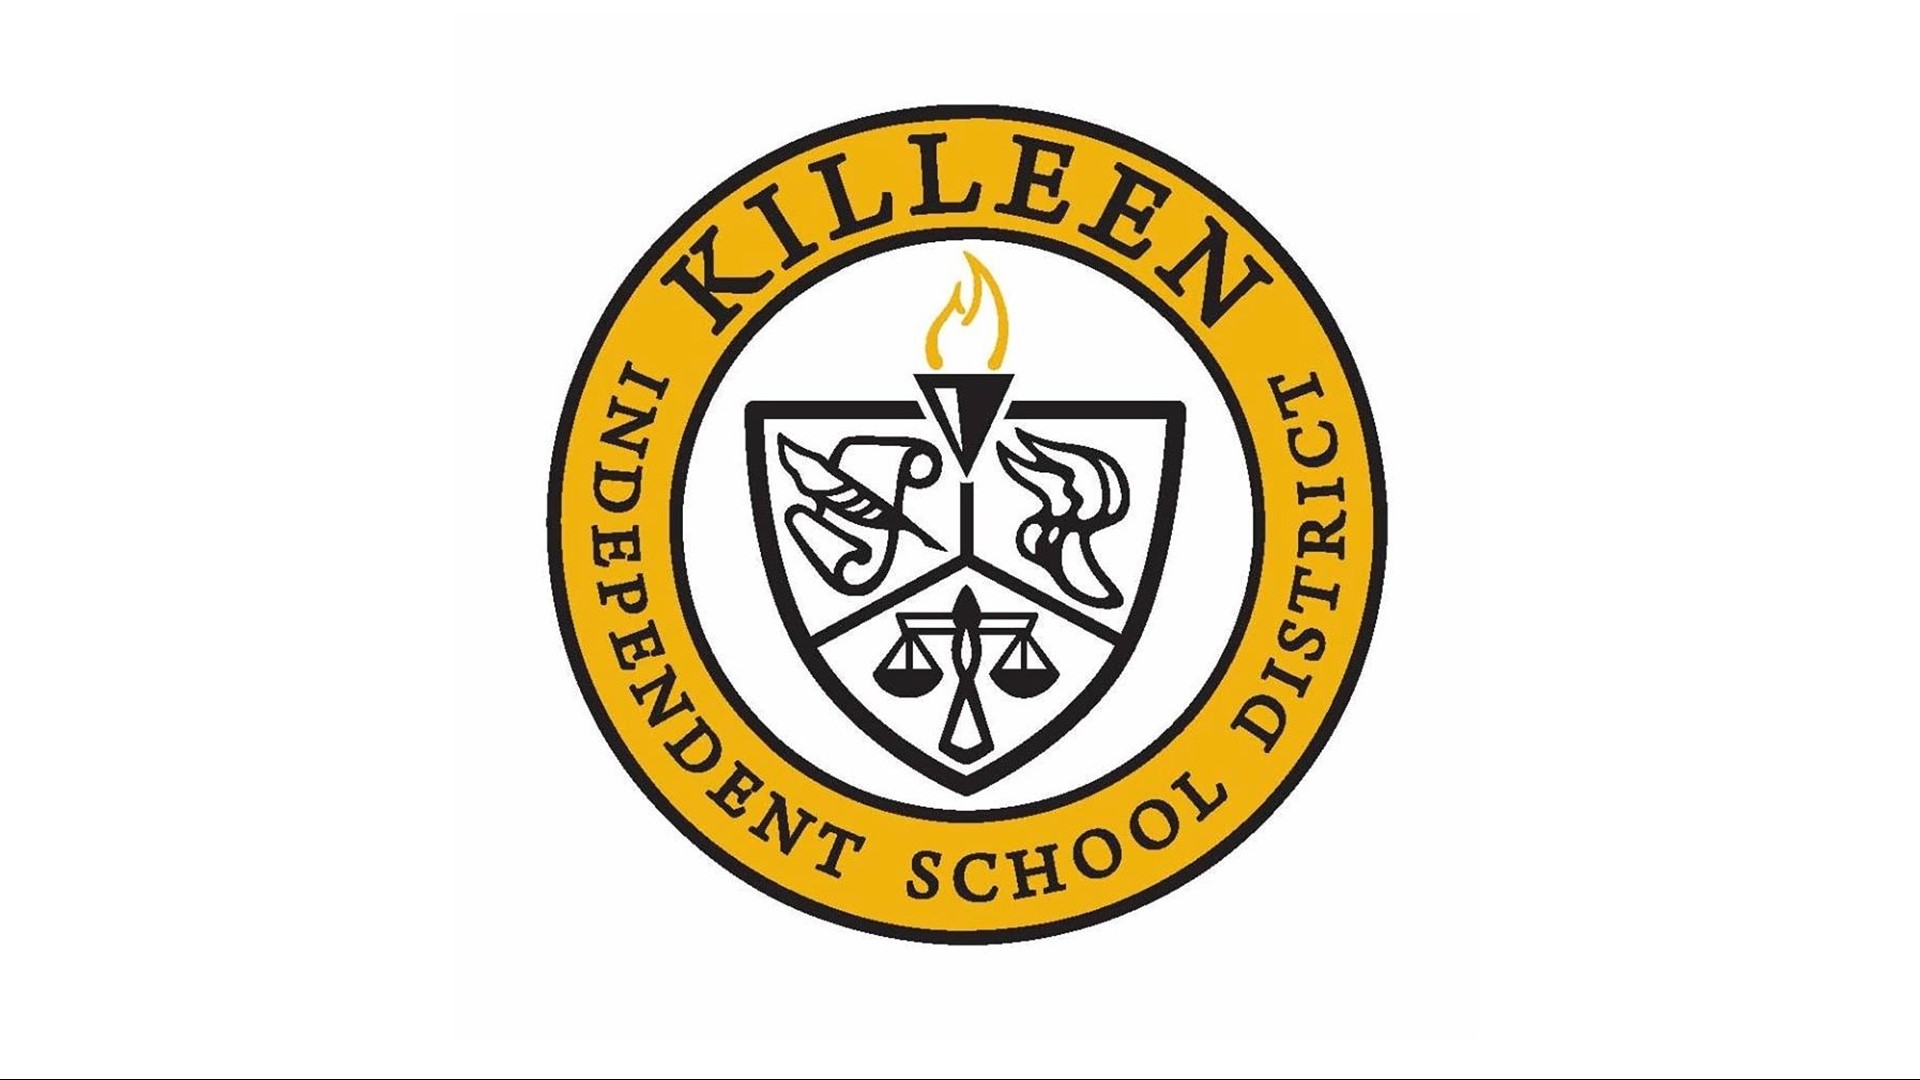 Superintendent John Craft and other district administrators went to Washington D.C. to make sure Killeen ISD gets enough federal funding.